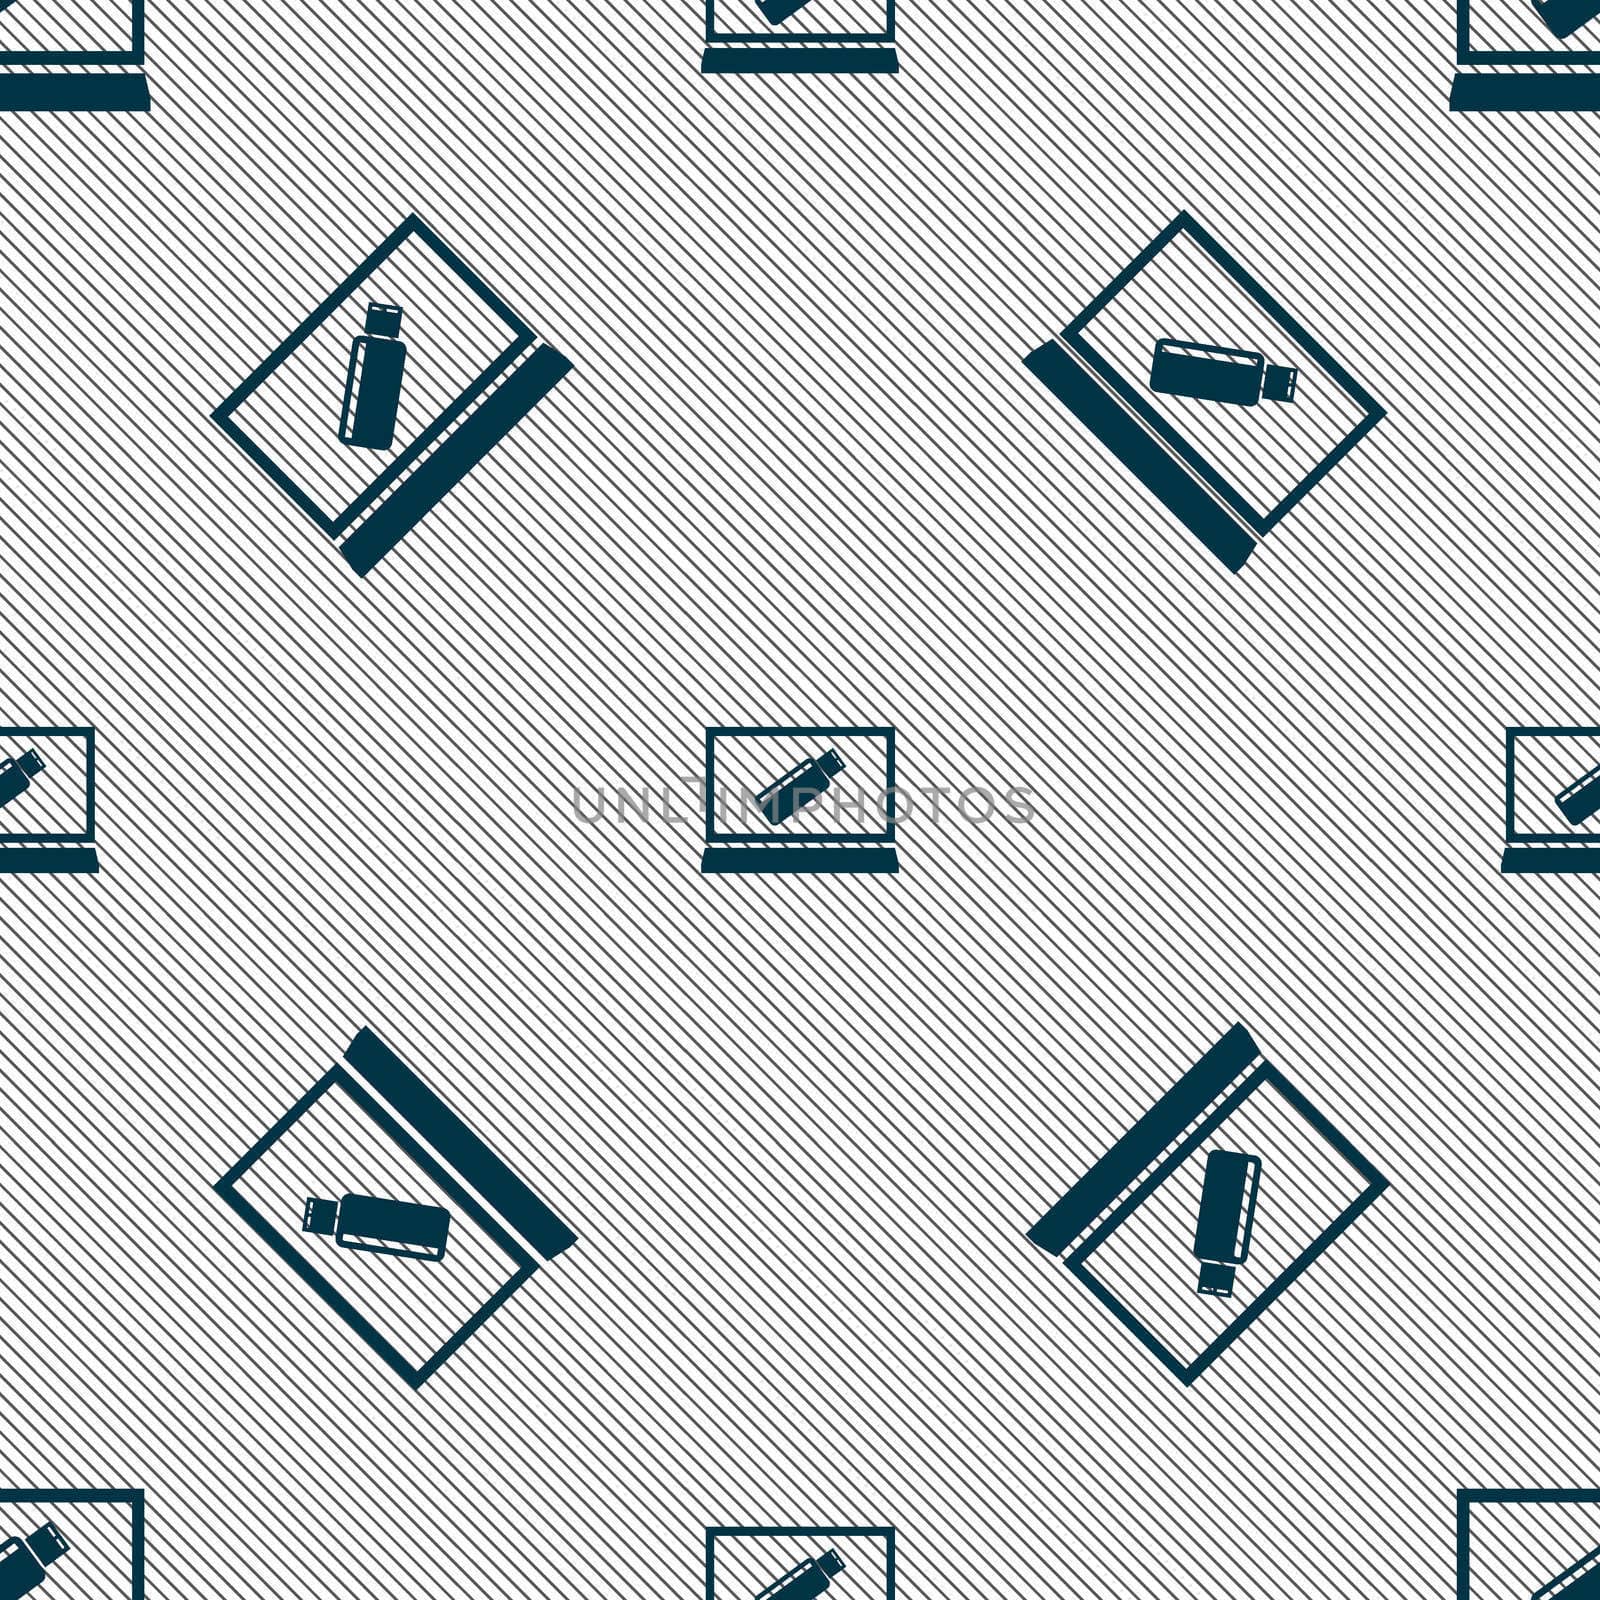 usb flash drive and monitor sign icon. Video game symbol. Seamless pattern with geometric texture. illustration